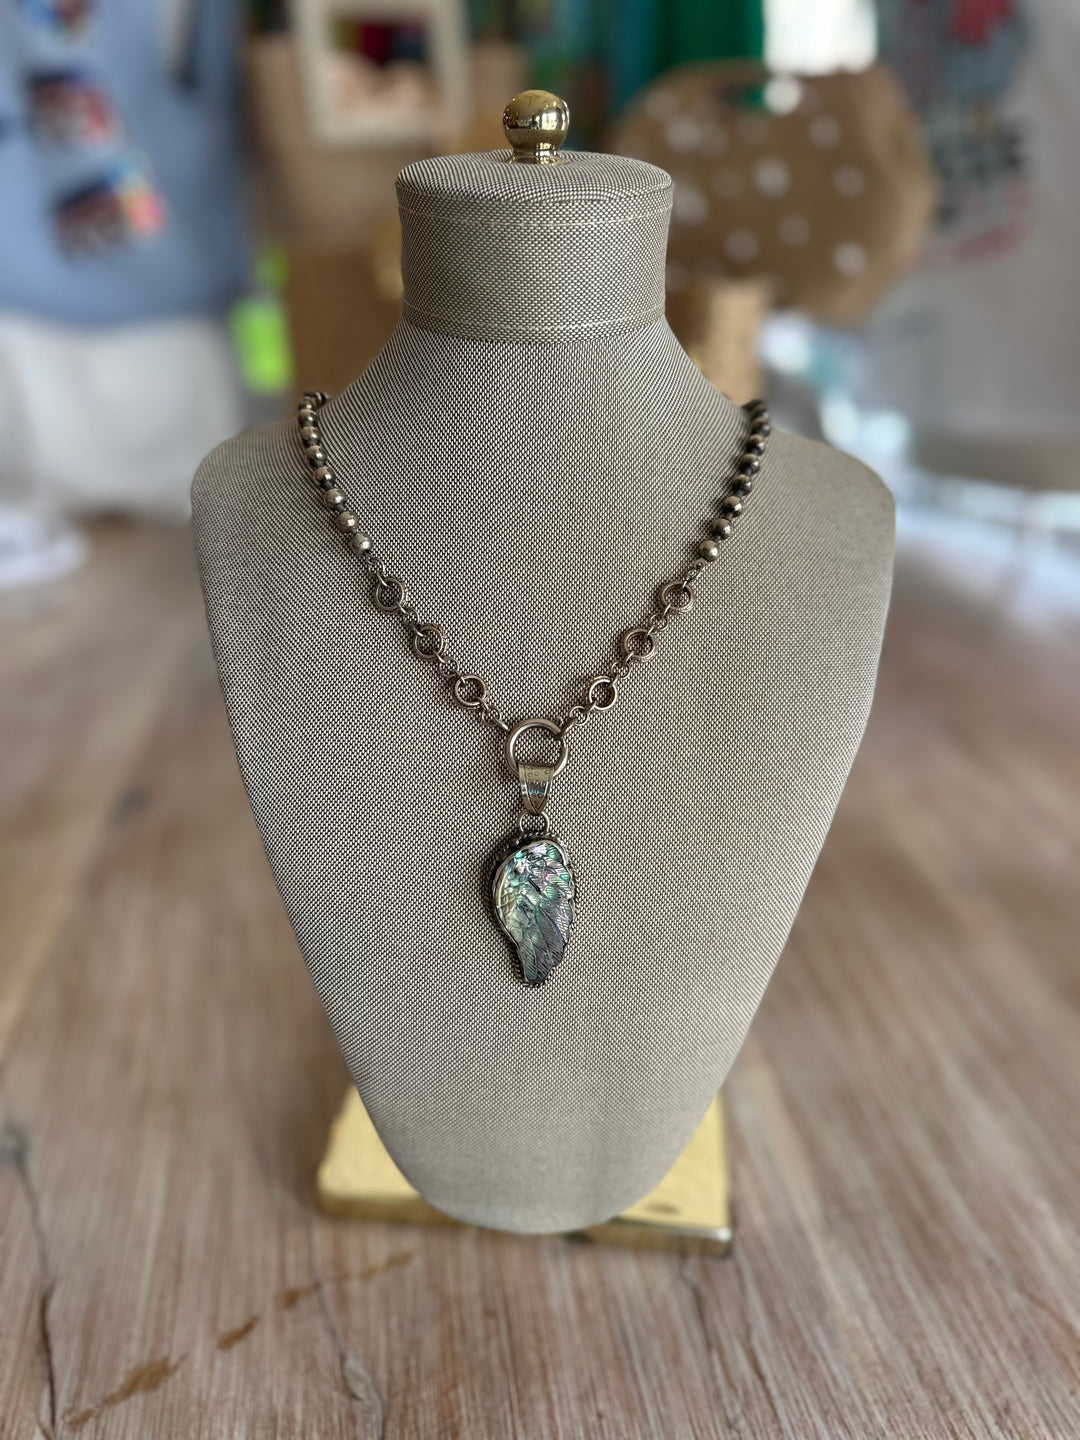 Vintage Sterling Chain With Carved Abalone Wing Pendant-Accessories-Erin Knight Designs-Shop with Bloom West Boutique, Women's Fashion Boutique, Located in Houma, Louisiana